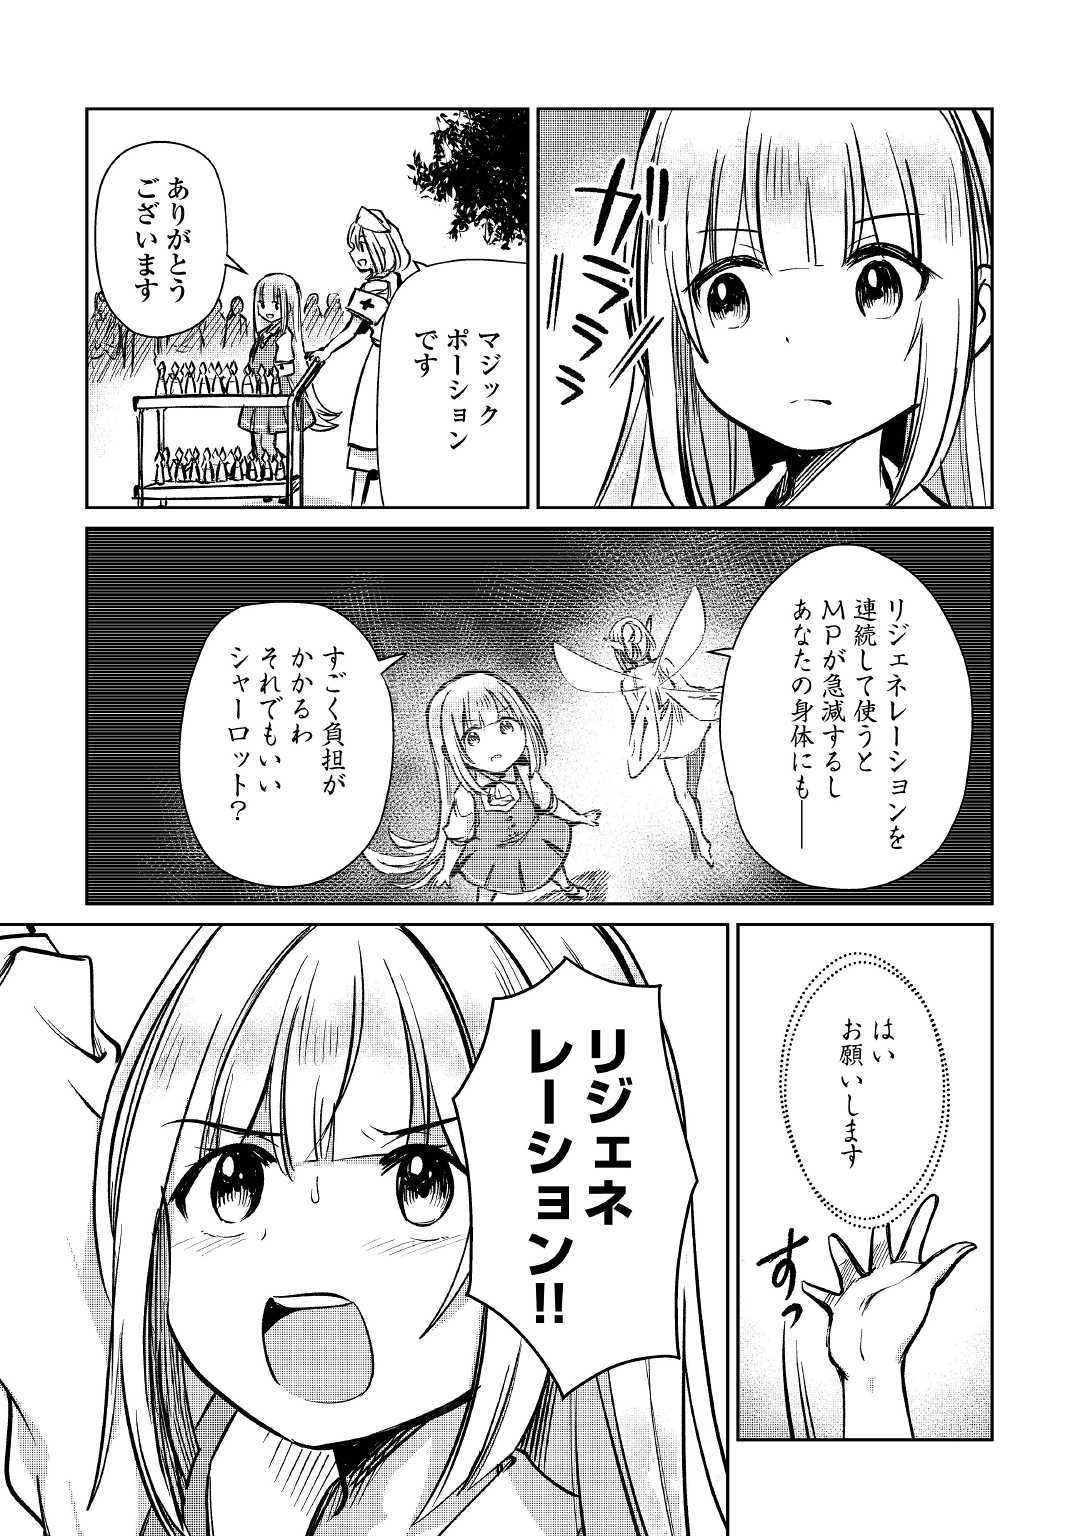 The Former Structural Researcher’s Story of Otherworldly Adventure 第10話 - Page 27